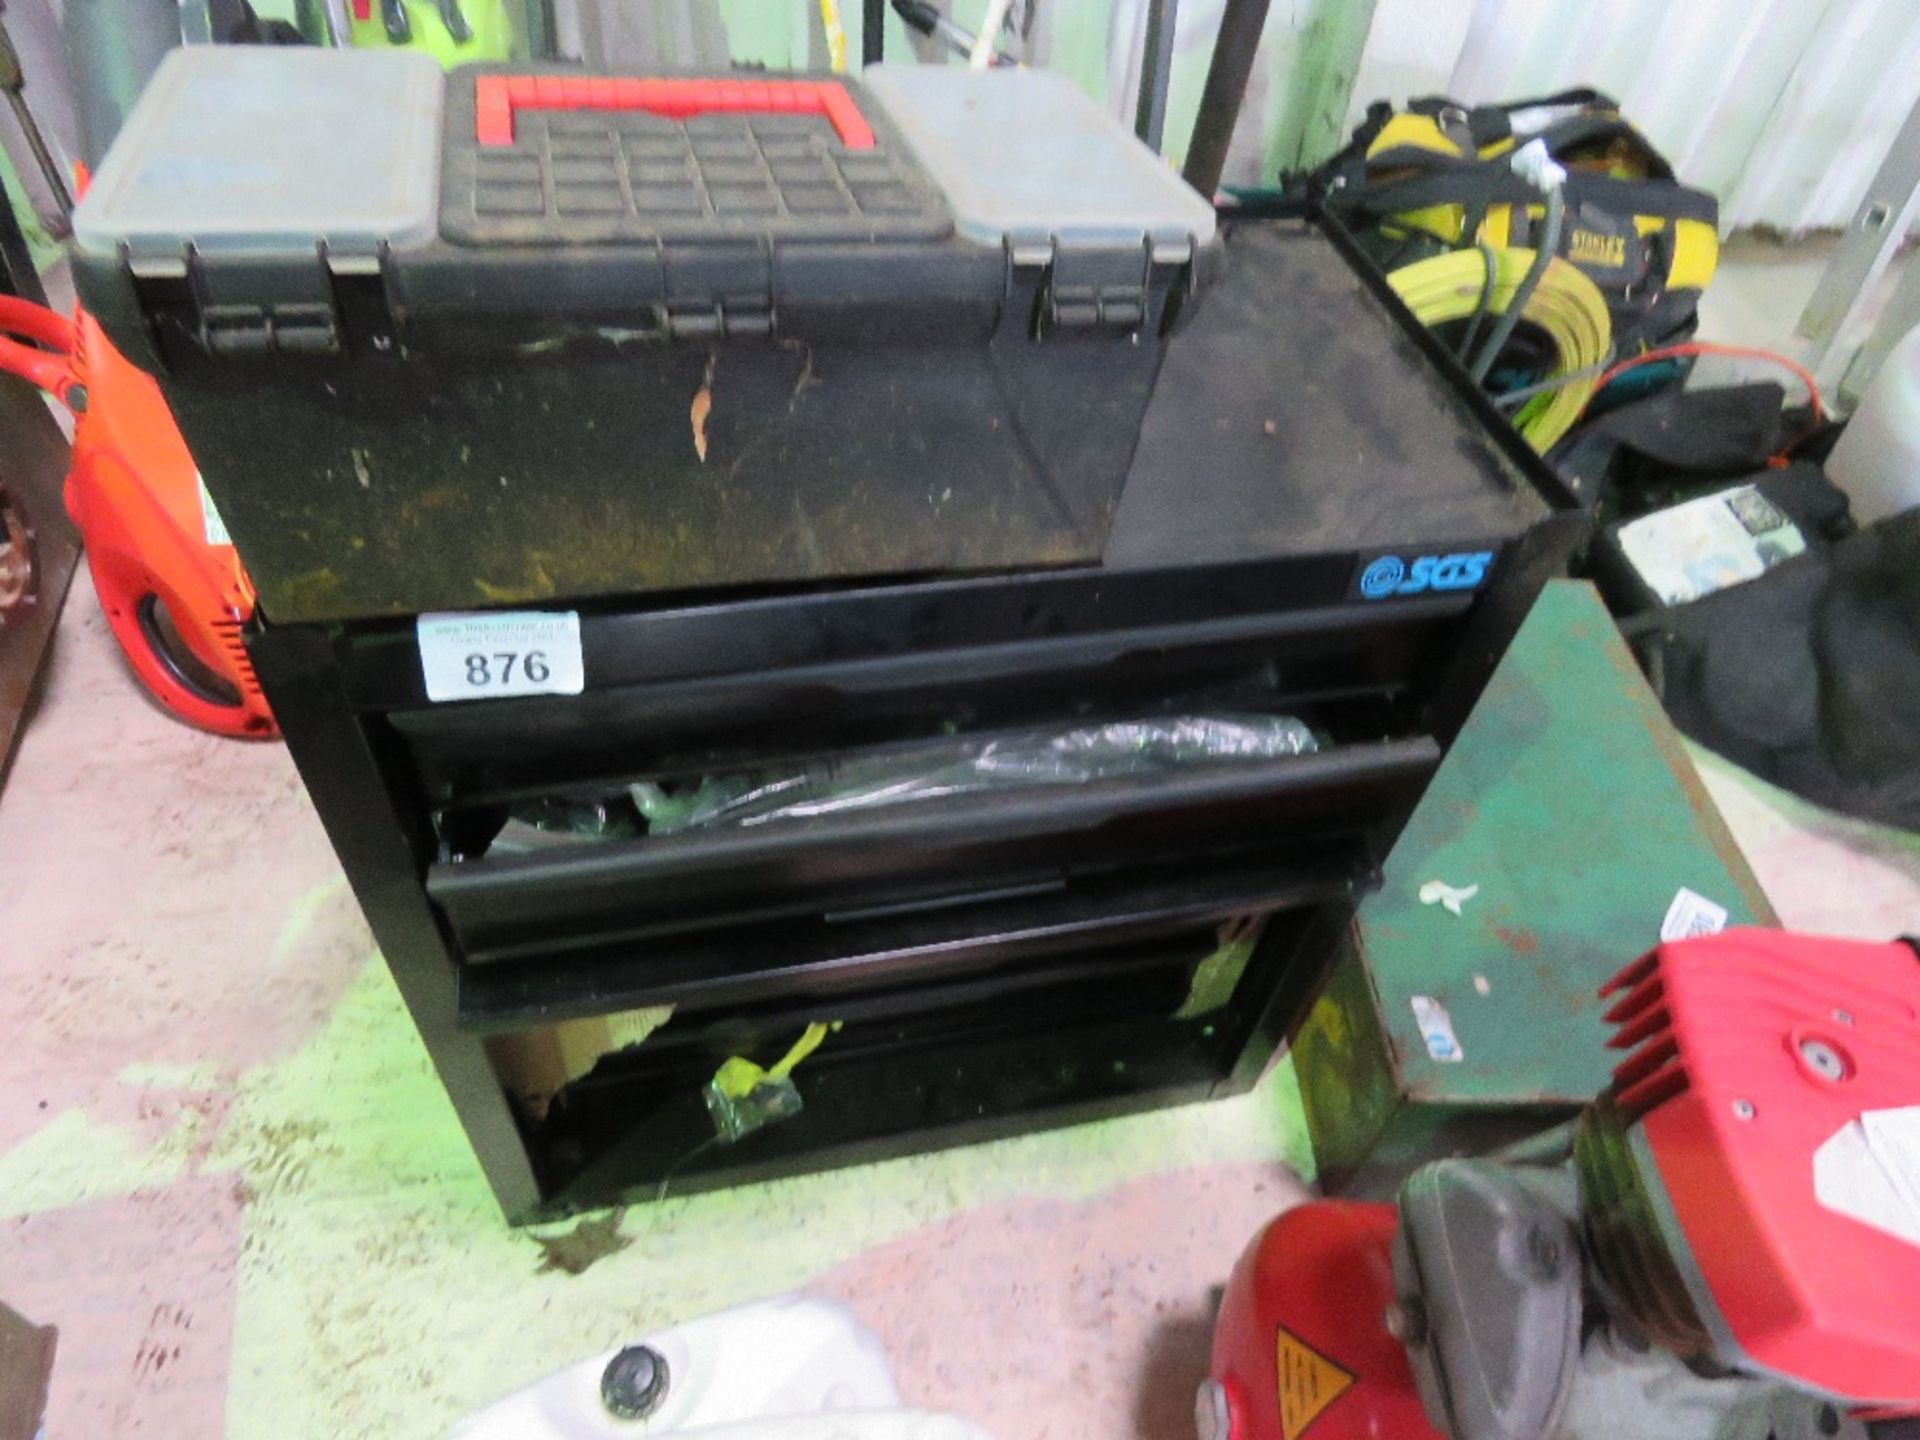 SGS MULTI DRAWER WORKSHOP CABINET PLUS A TOOL BOX. THIS LOT IS SOLD UNDER THE AUCTIONEERS MARGIN